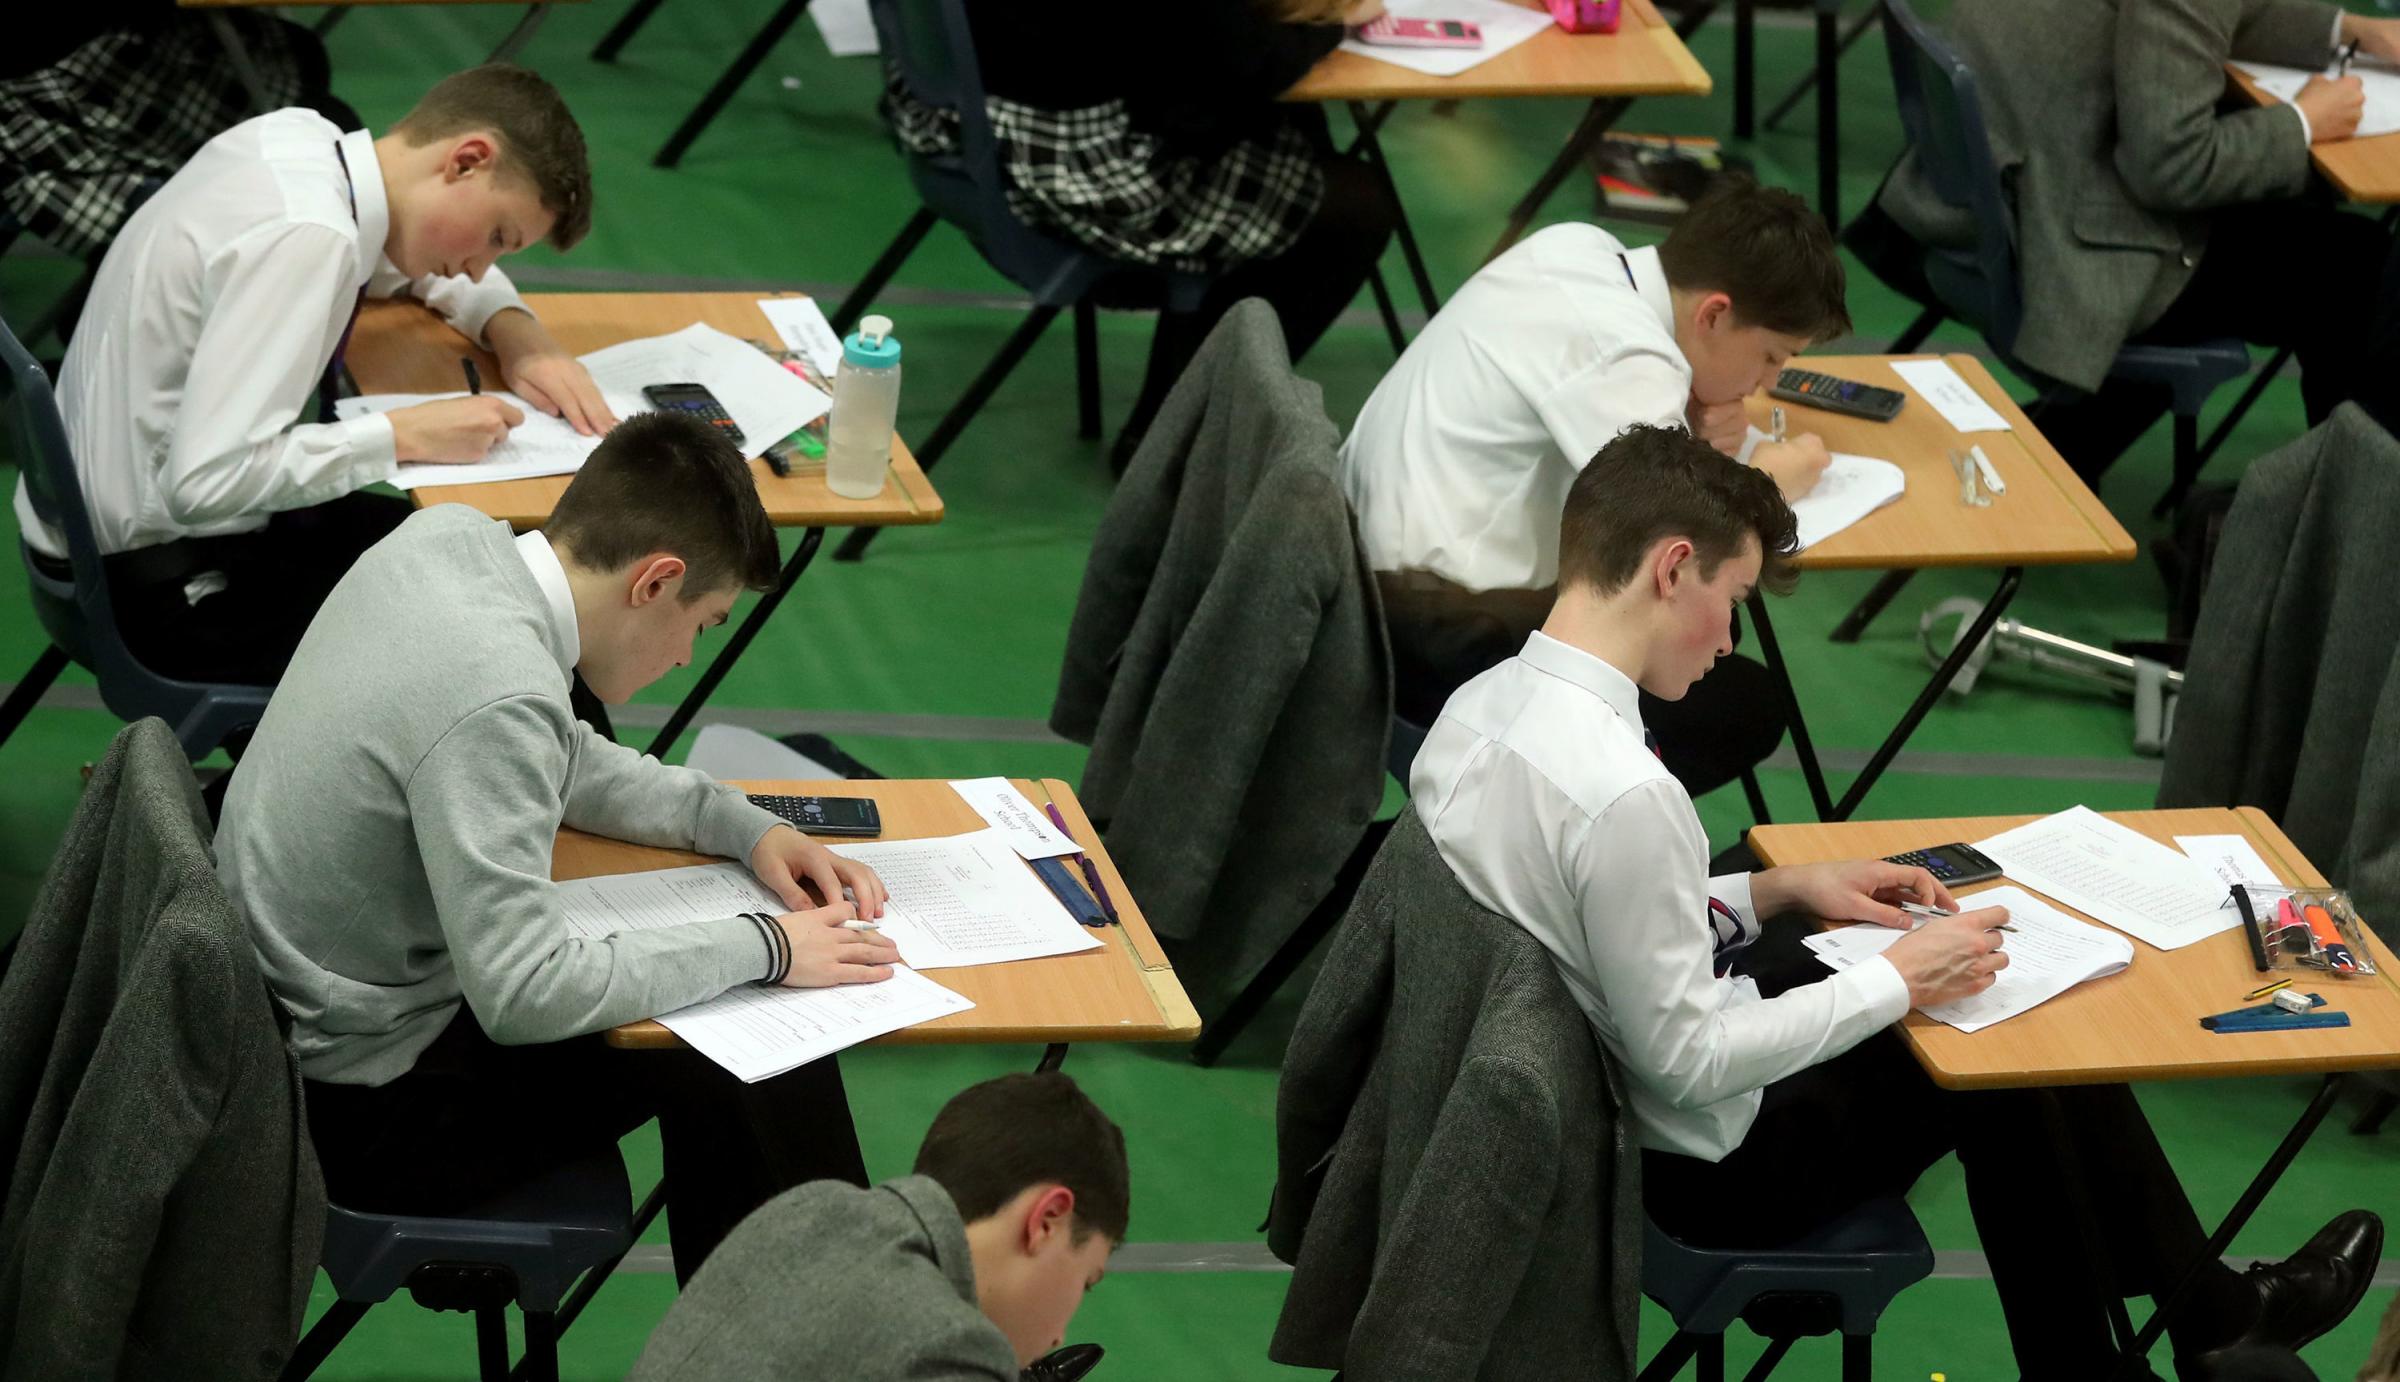 Glasgow pupils see exam suspended after printer breaks down